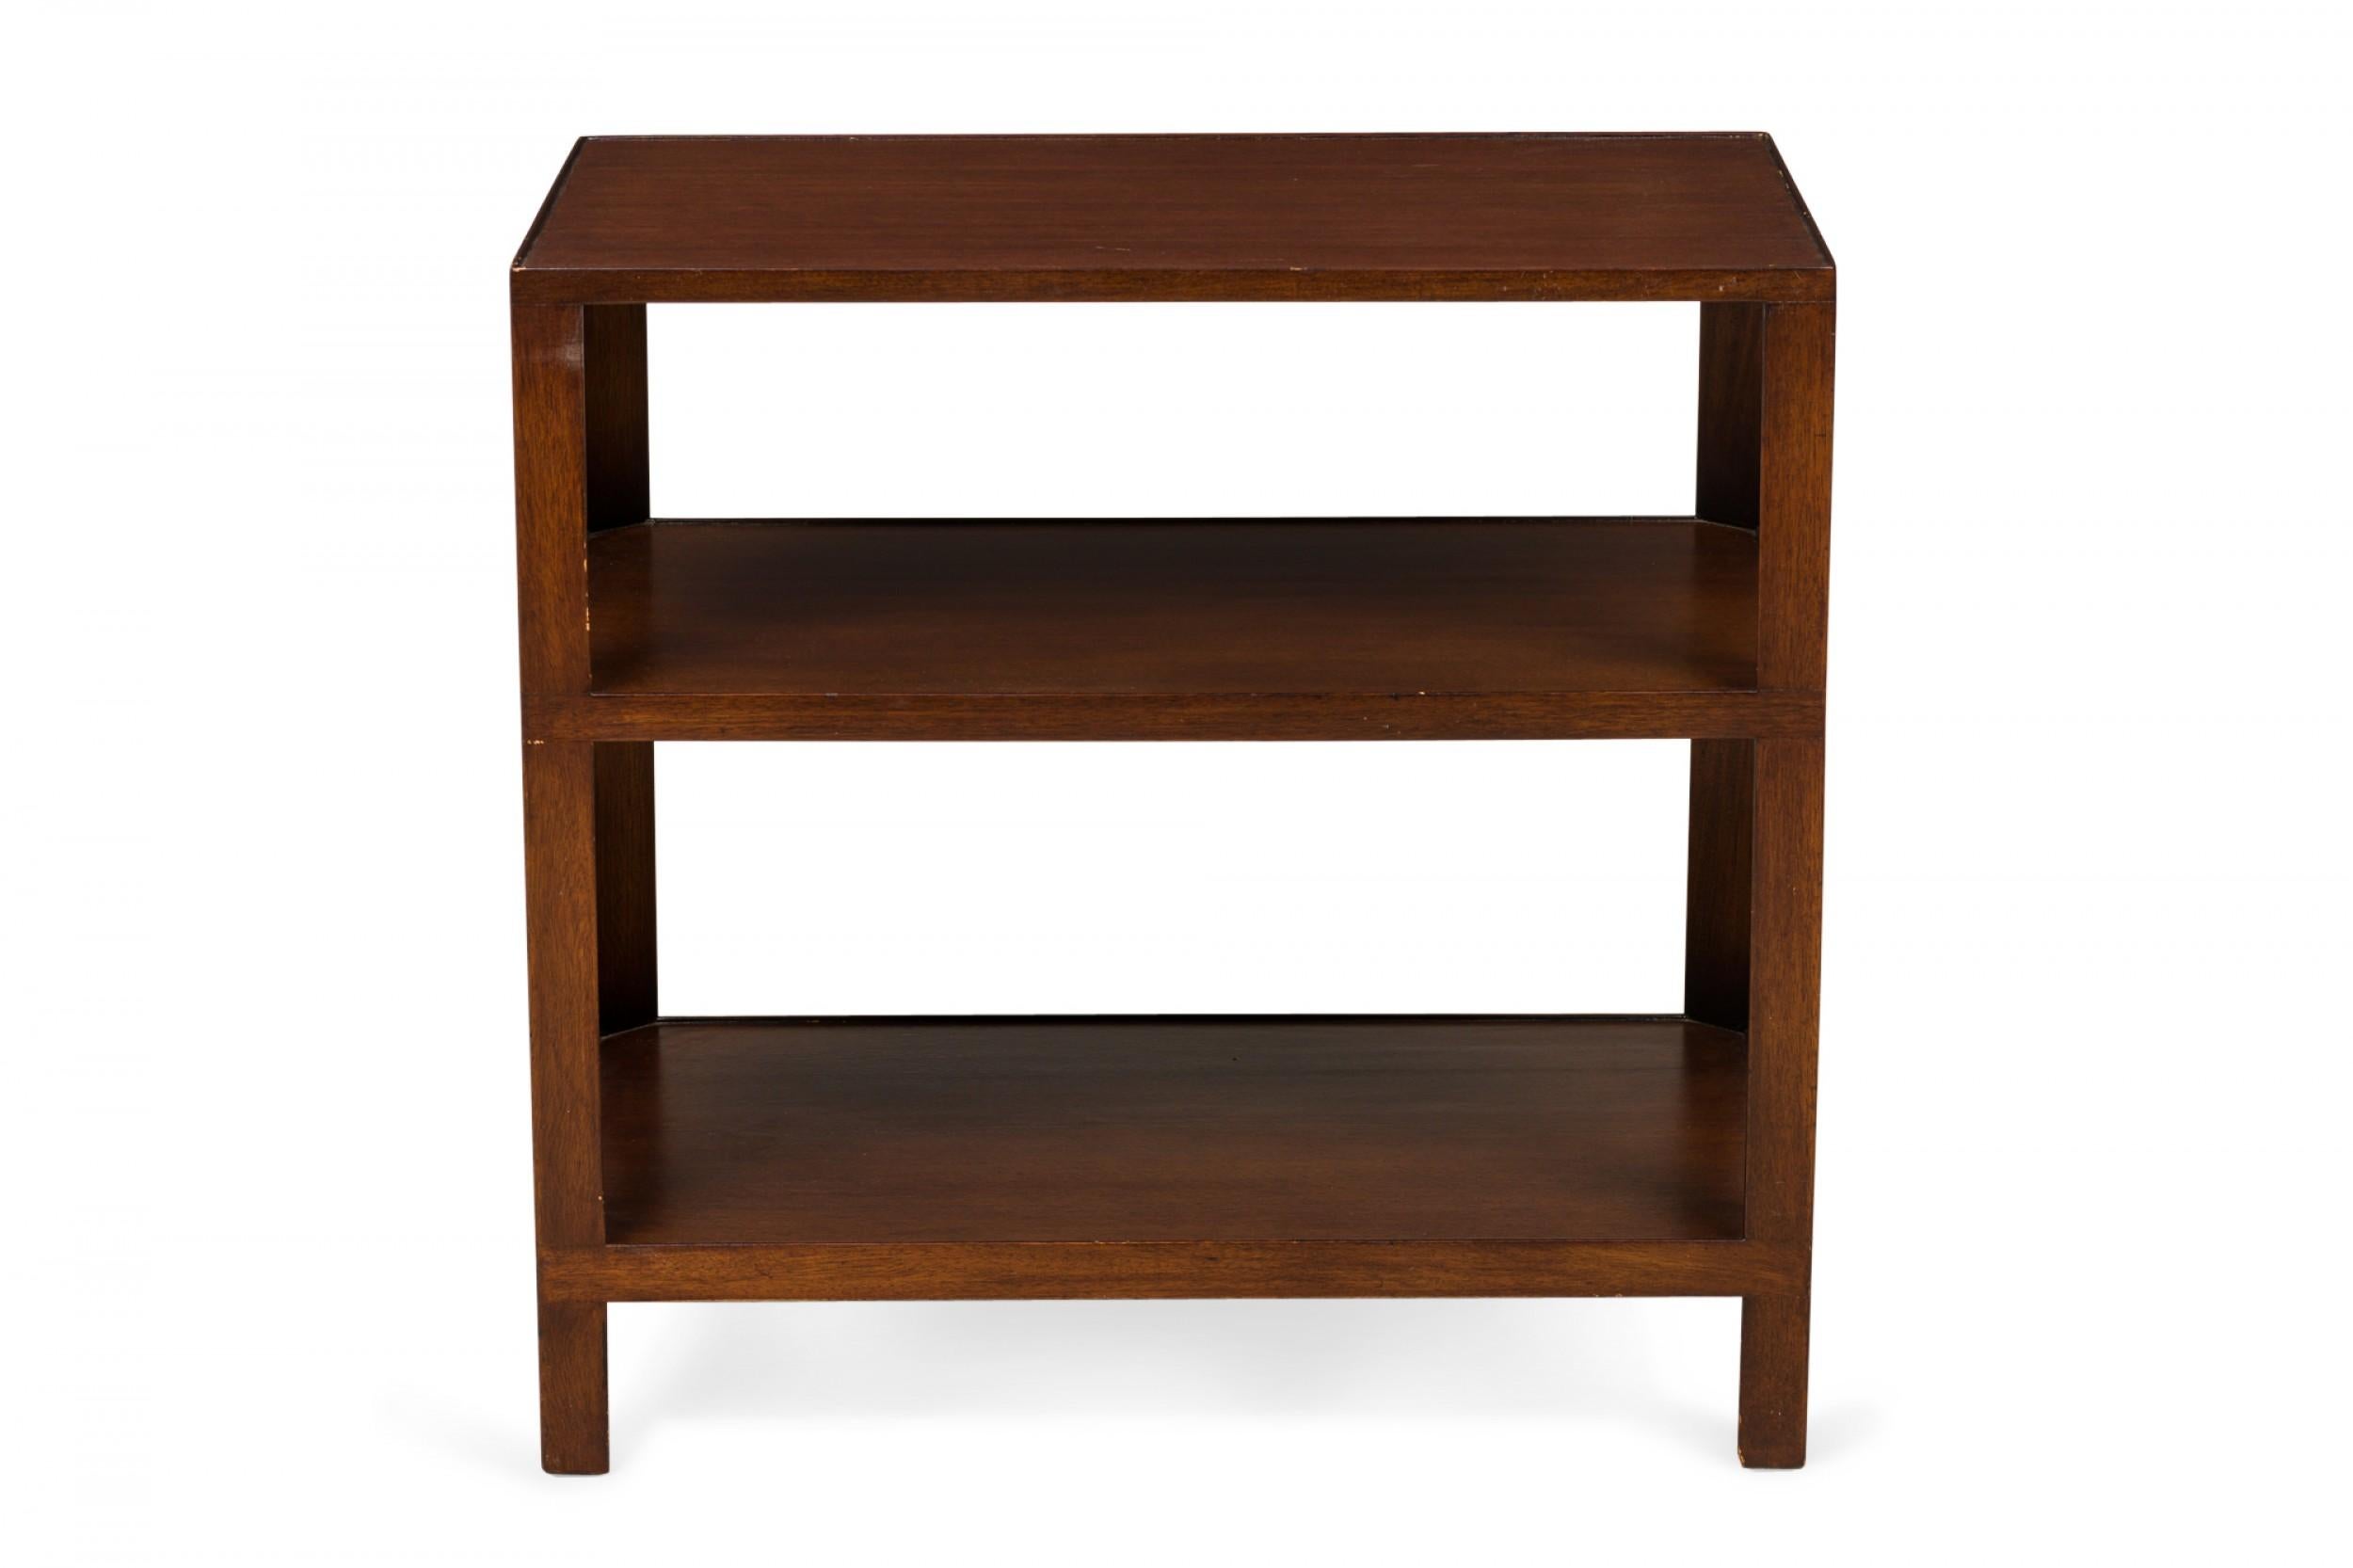 PAIR of American Mid-Century wooden end tables with a rectangular top and two identical lower shelves supported by four square legs. (EDWARD WORMLEY FOR DUNBAR)(PRICED AS PAIR)